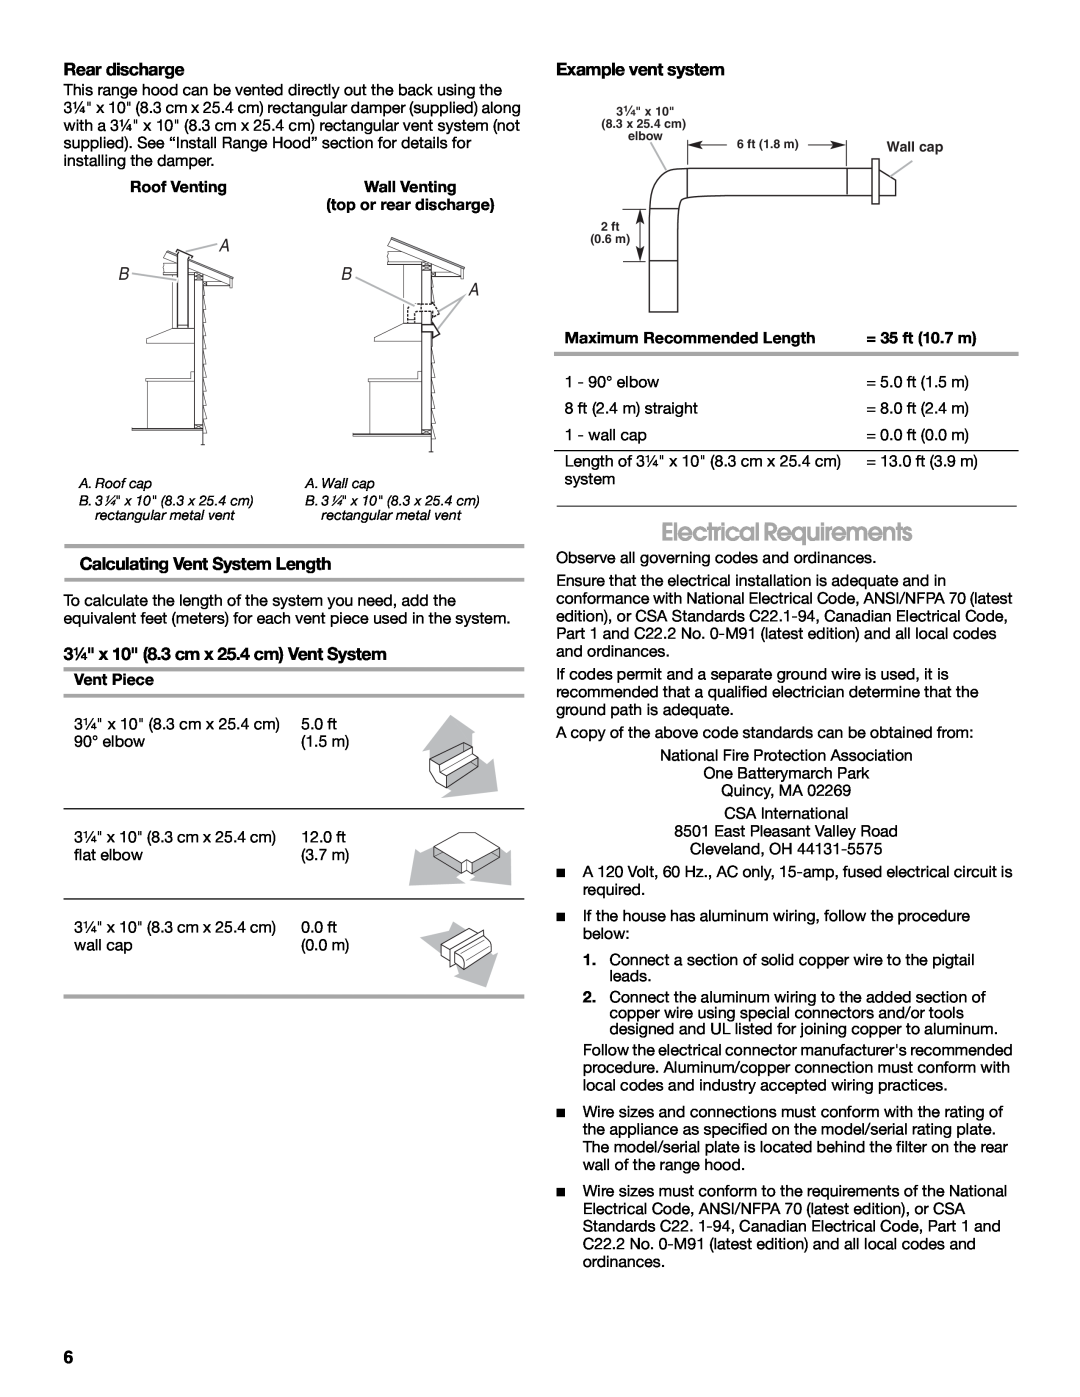 Jenn-Air W10274318A, LI3V3A Electrical Requirements, Rear discharge, Example vent system, Calculating Vent System Length 